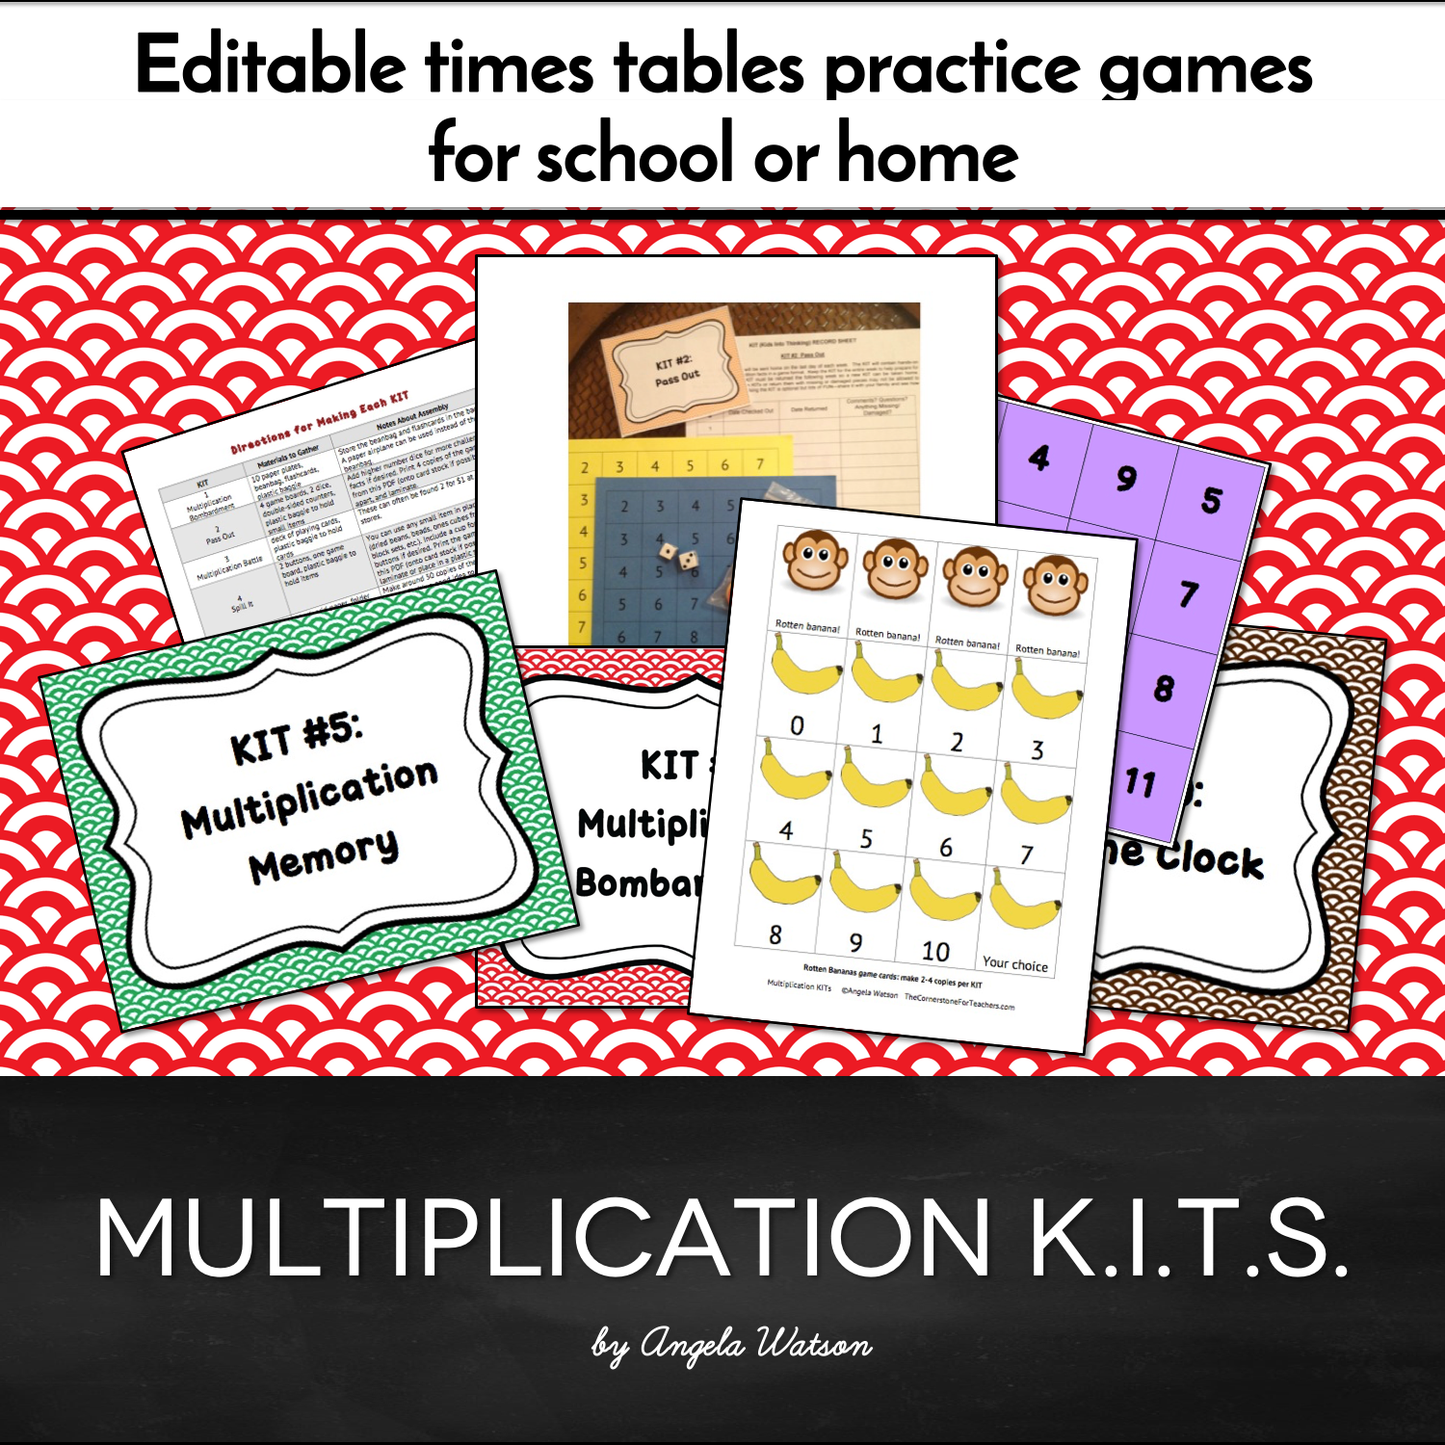 Multiplication KITs: Editable math games for school or home